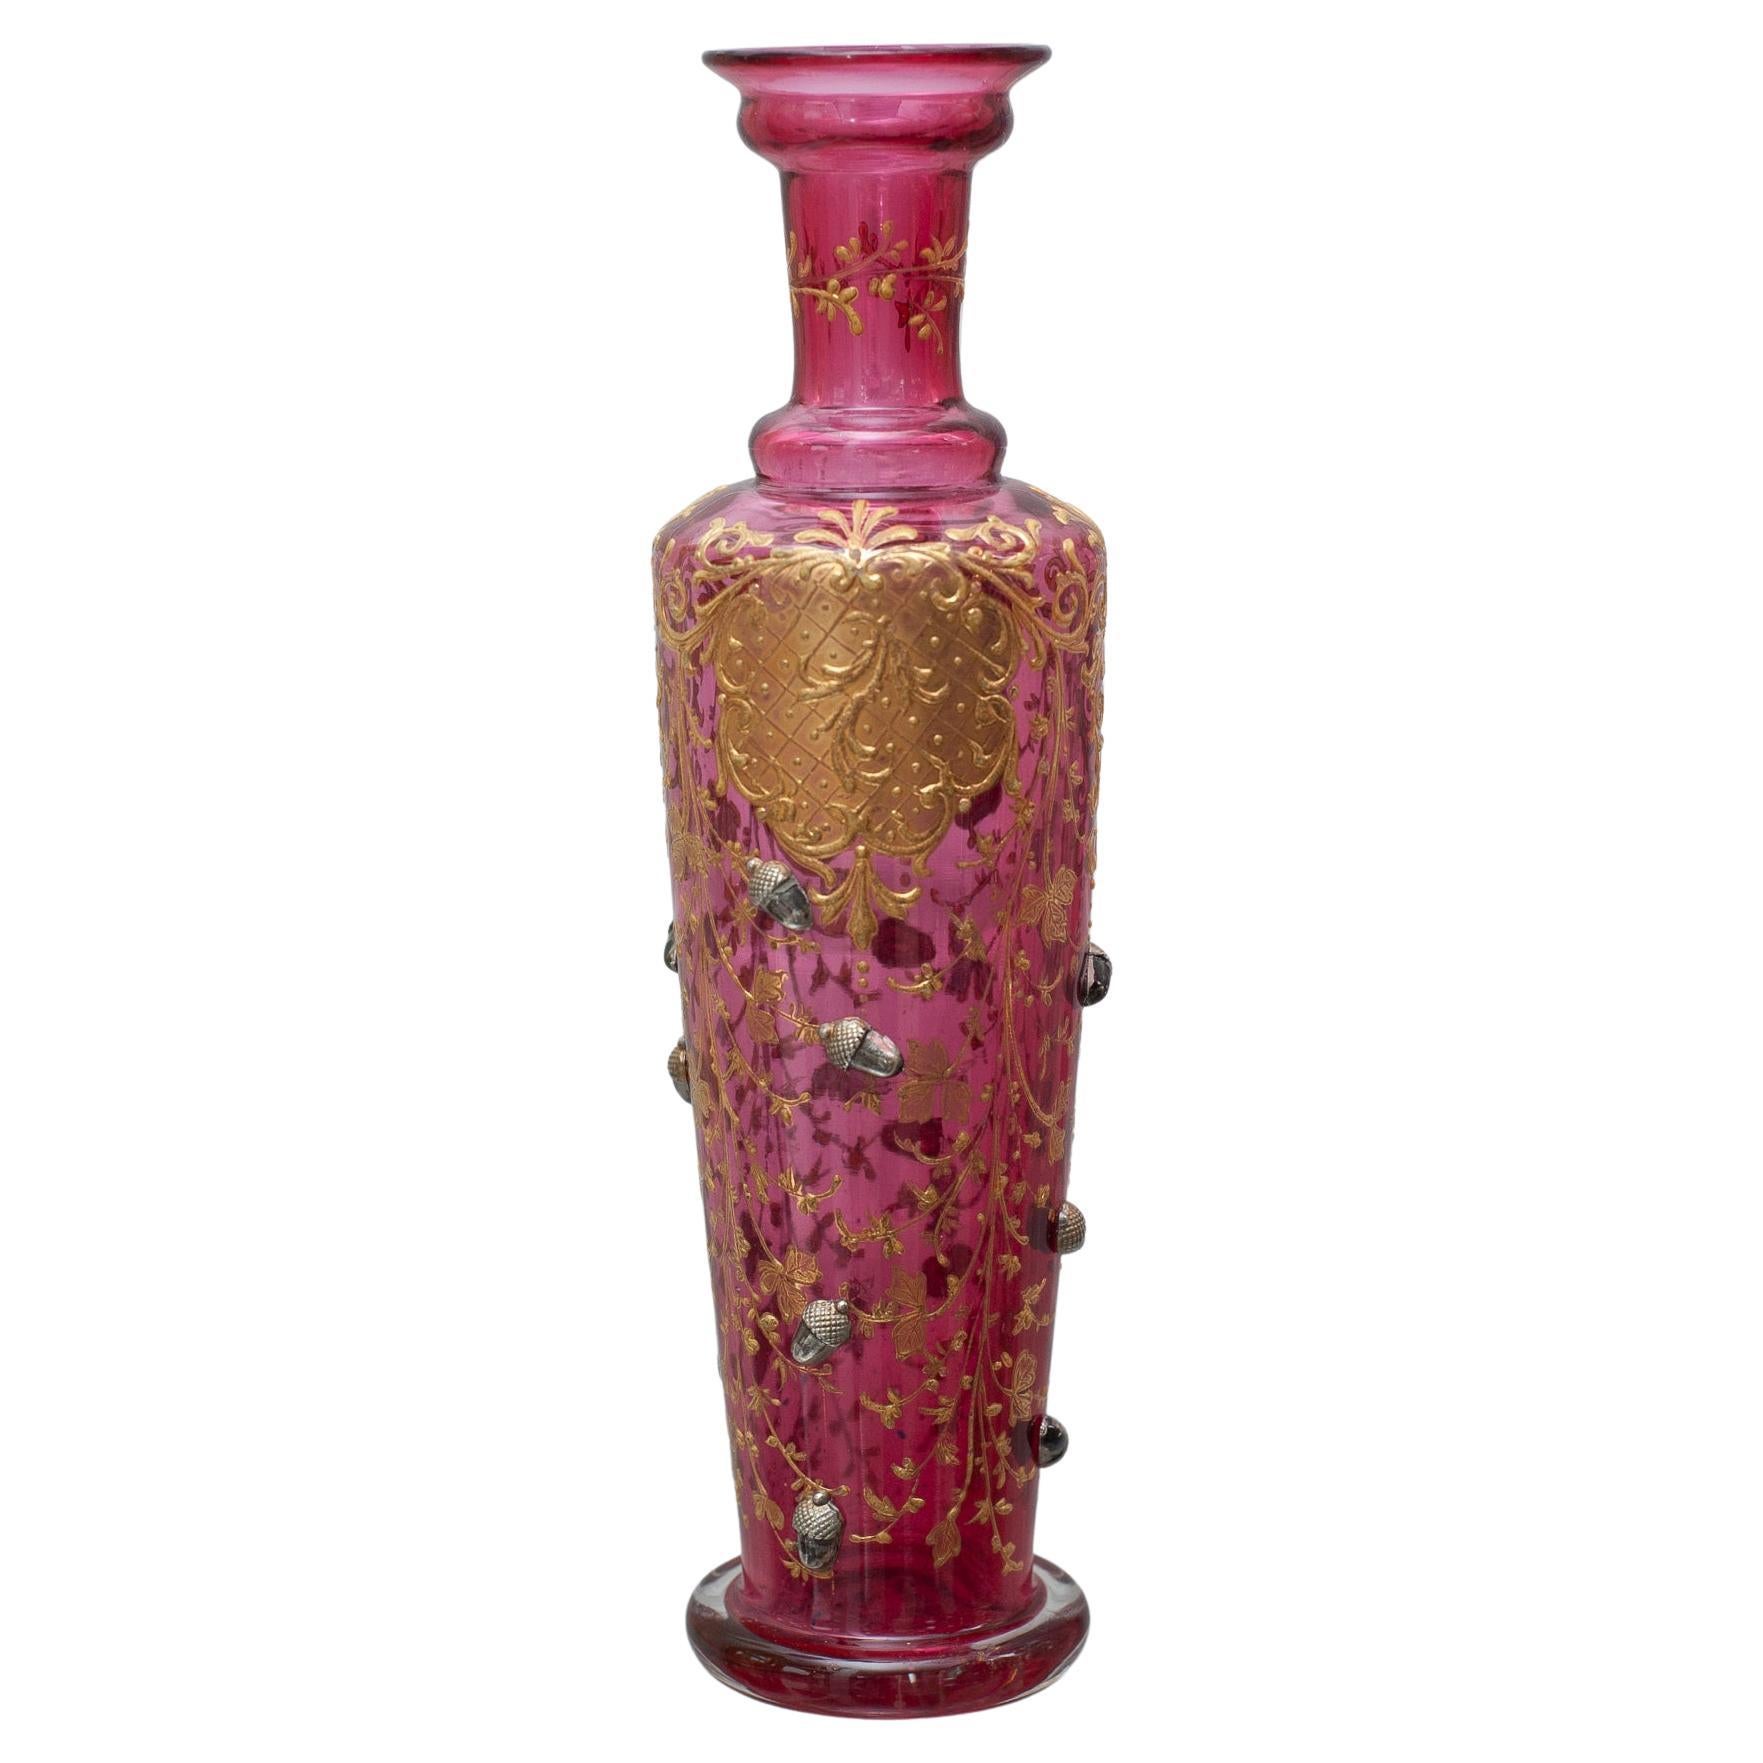 Antique Moser Cranberry Bud Vase with Ornate Gilding and Acorn Motifs For Sale